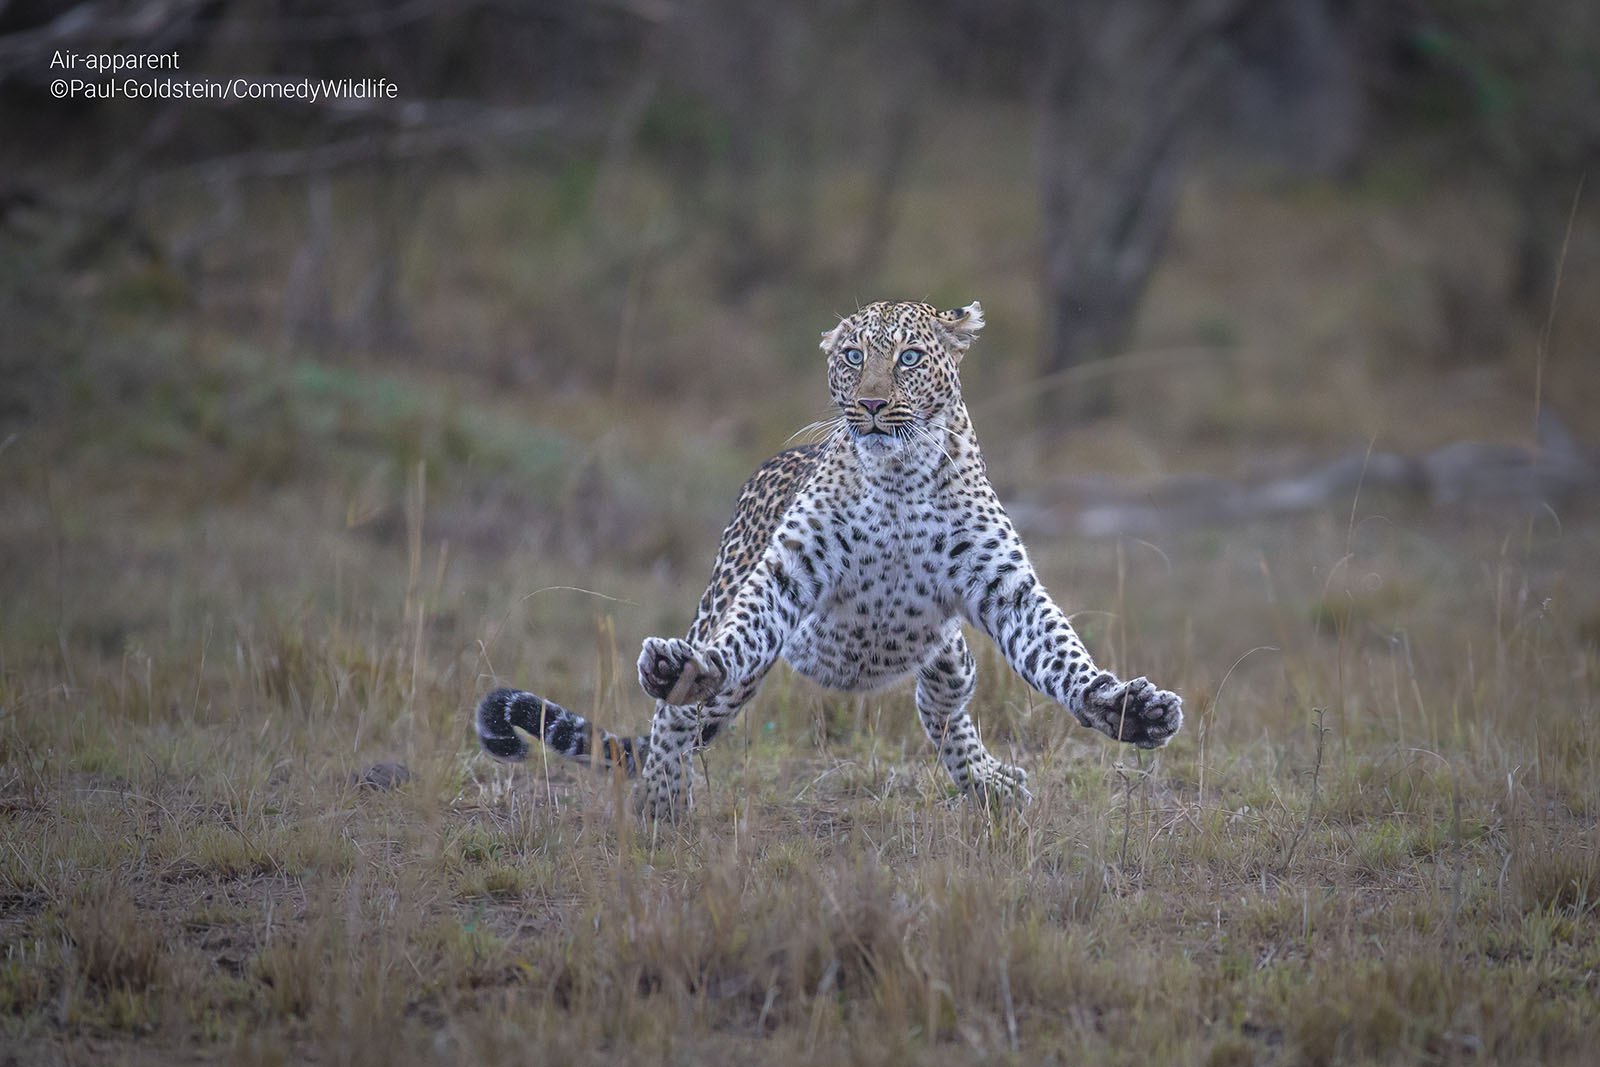 A leopard jumps up in surprise.